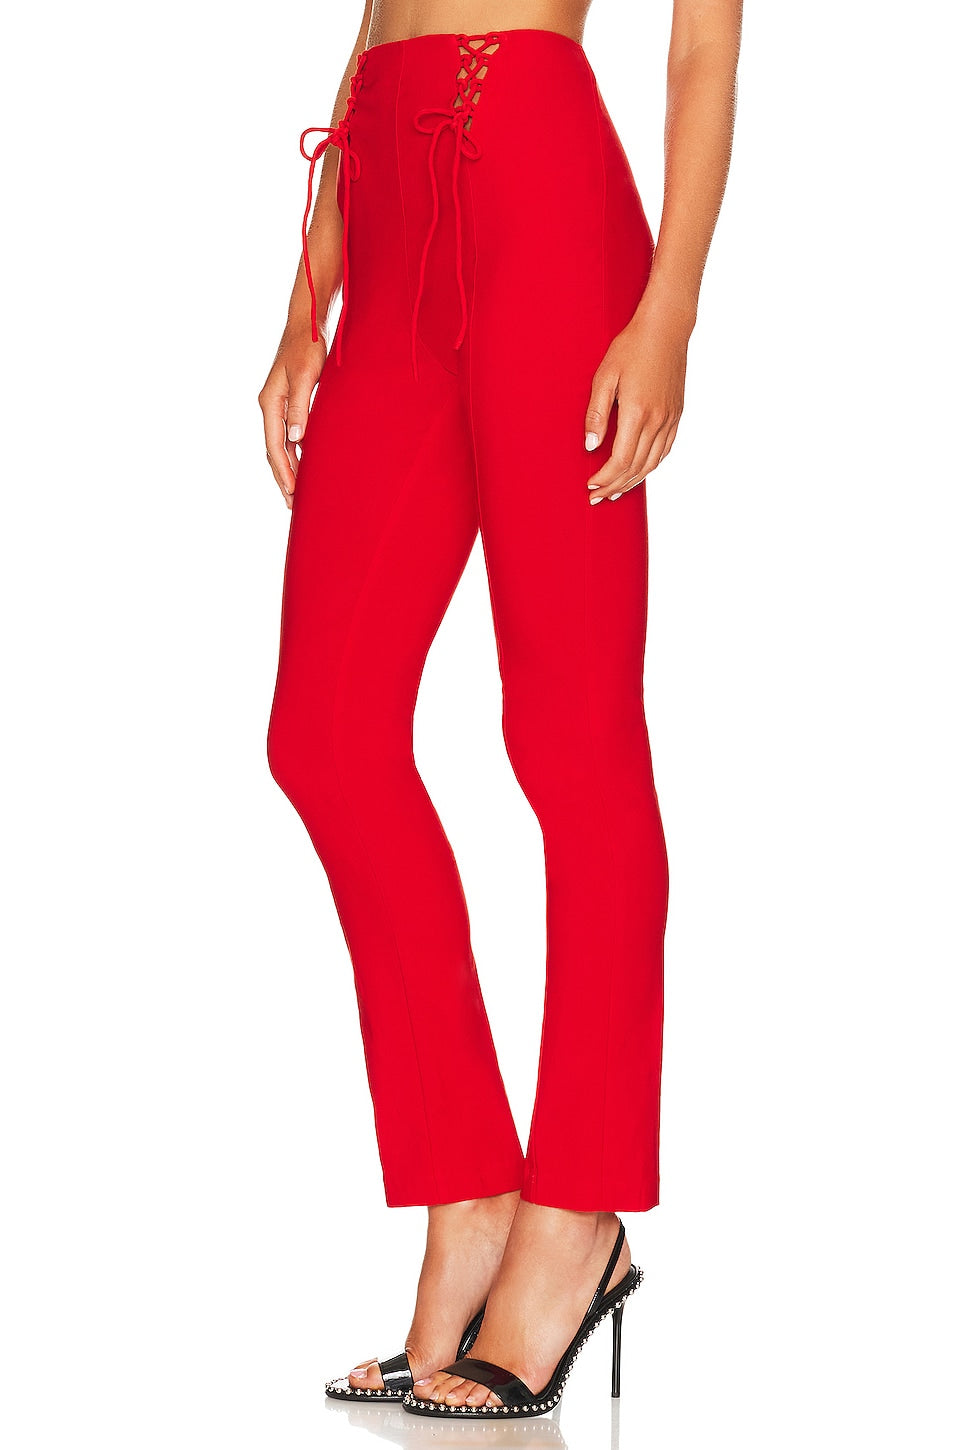 NBD Alessia Pant in Red Size X Small